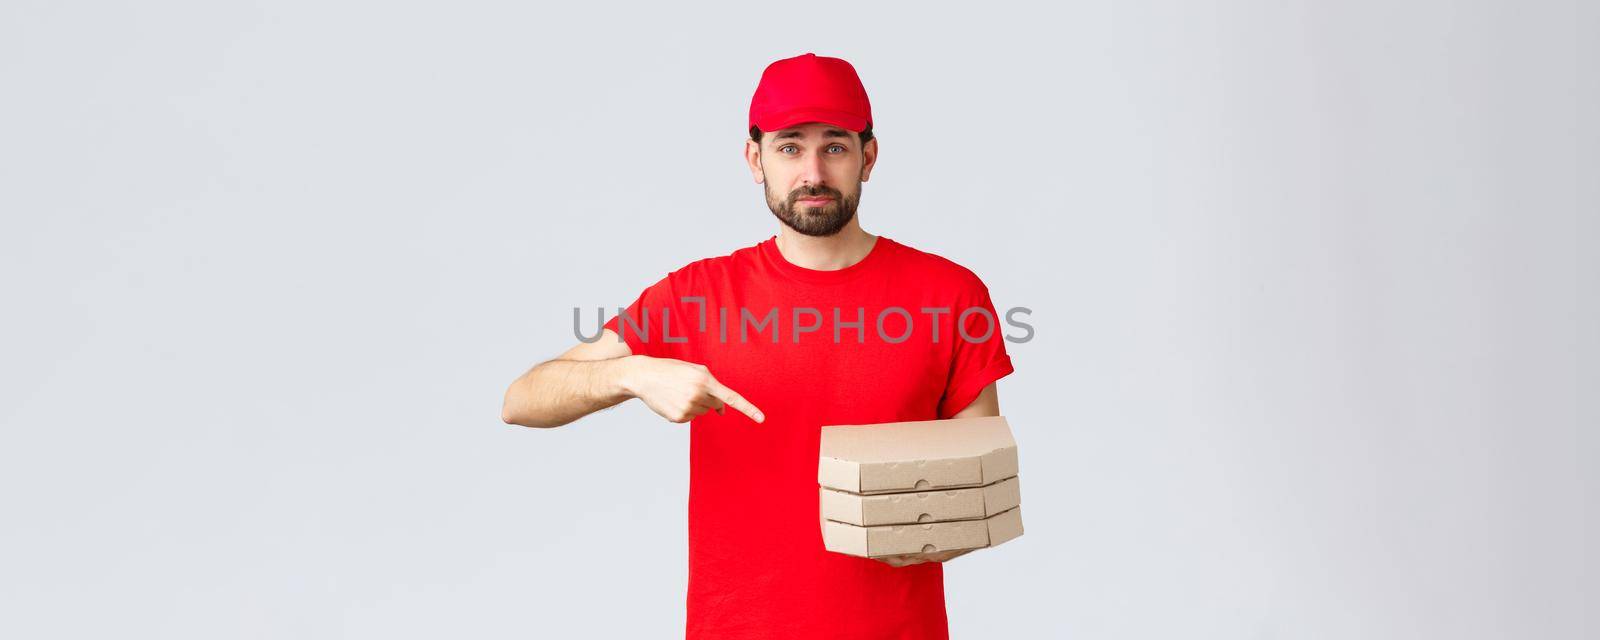 Food delivery, quarantine, stay home and order online concept. Confident friendly courier in red uniform cap and t-shirt, employee bring order pizza, pointing finger at boxes, grey background.